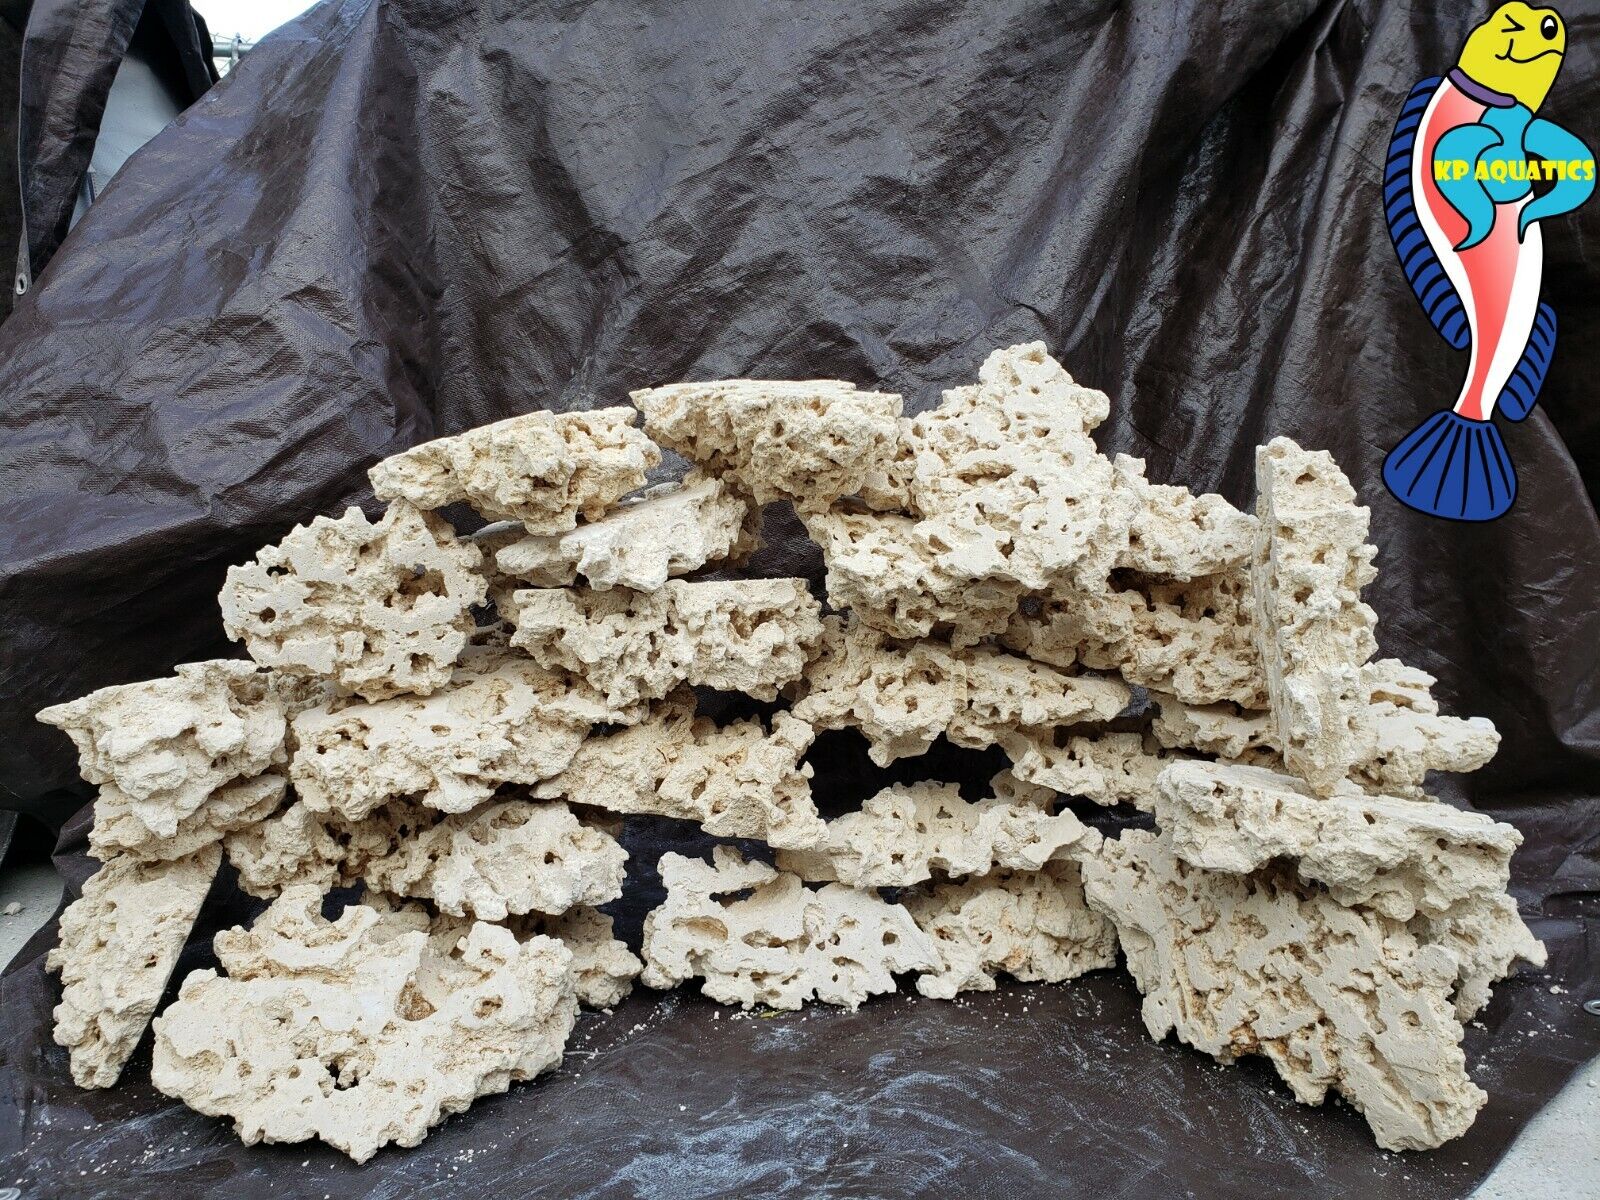 15 lbs of Dry, Lightweight and Porous Shelf Rock for Aquariums, Cut Rock